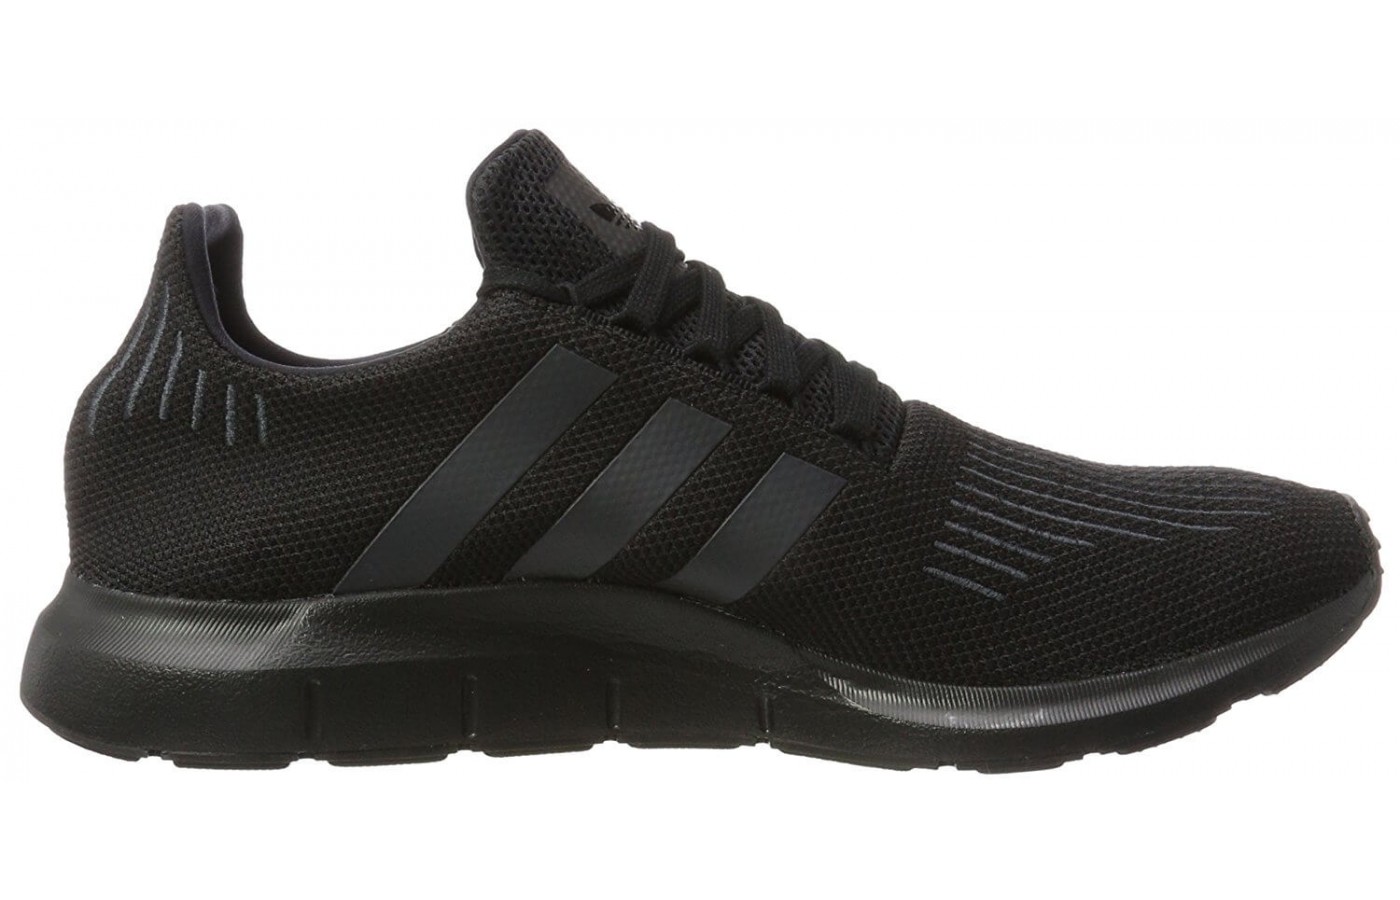 The Primeknit used for the Adidas Swiftrun Primeknit upper is lightweight and highly breathable.